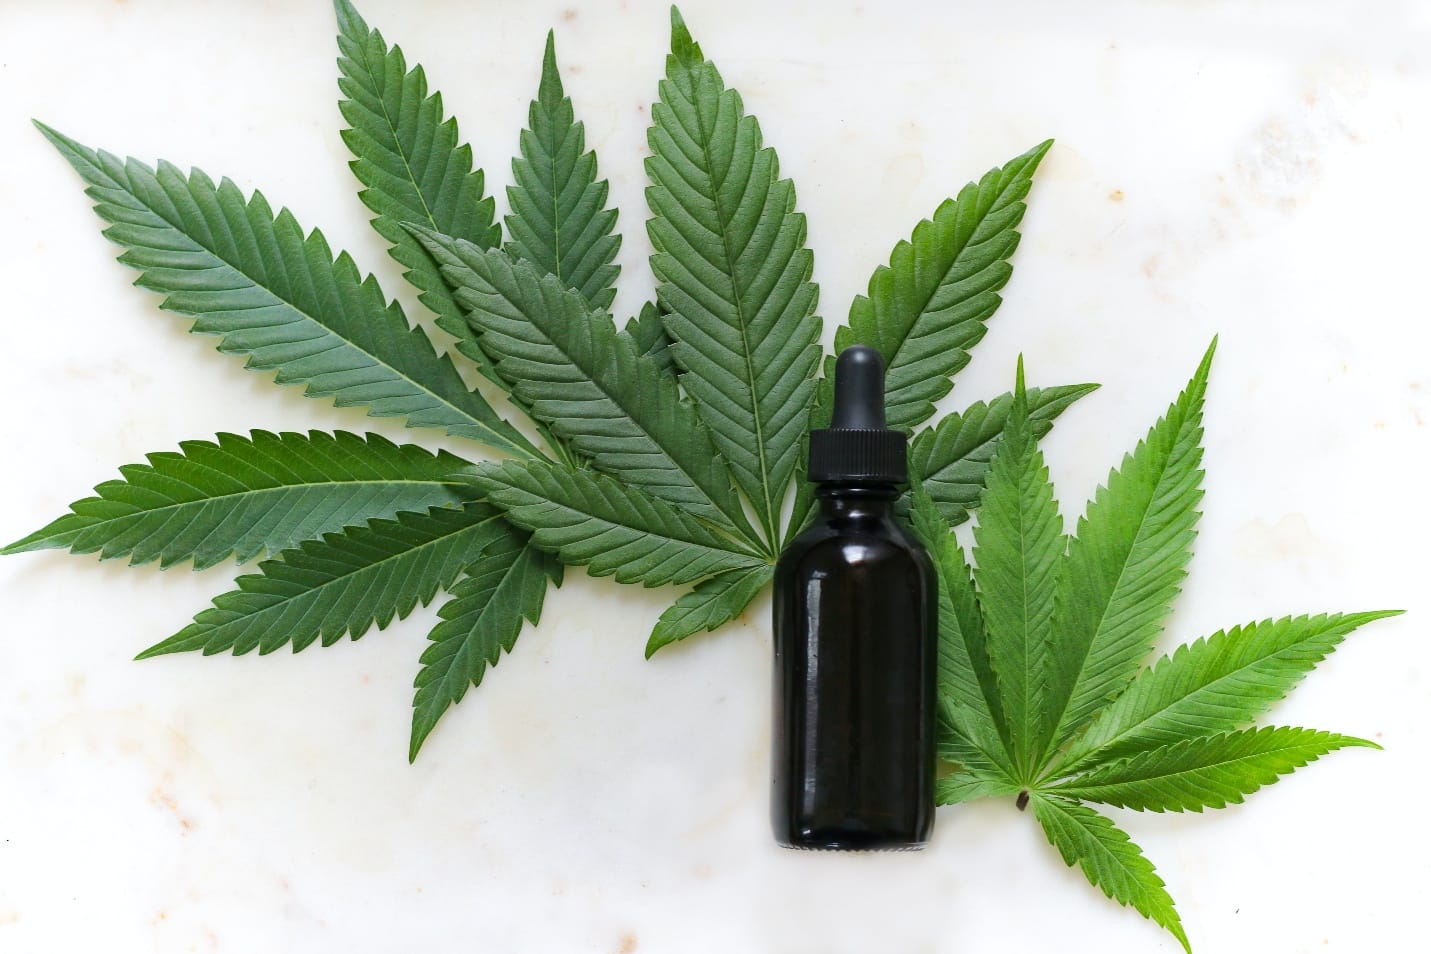 Can CBD Oil Be Used With Dietary Supplements Like To Regulate Appetite